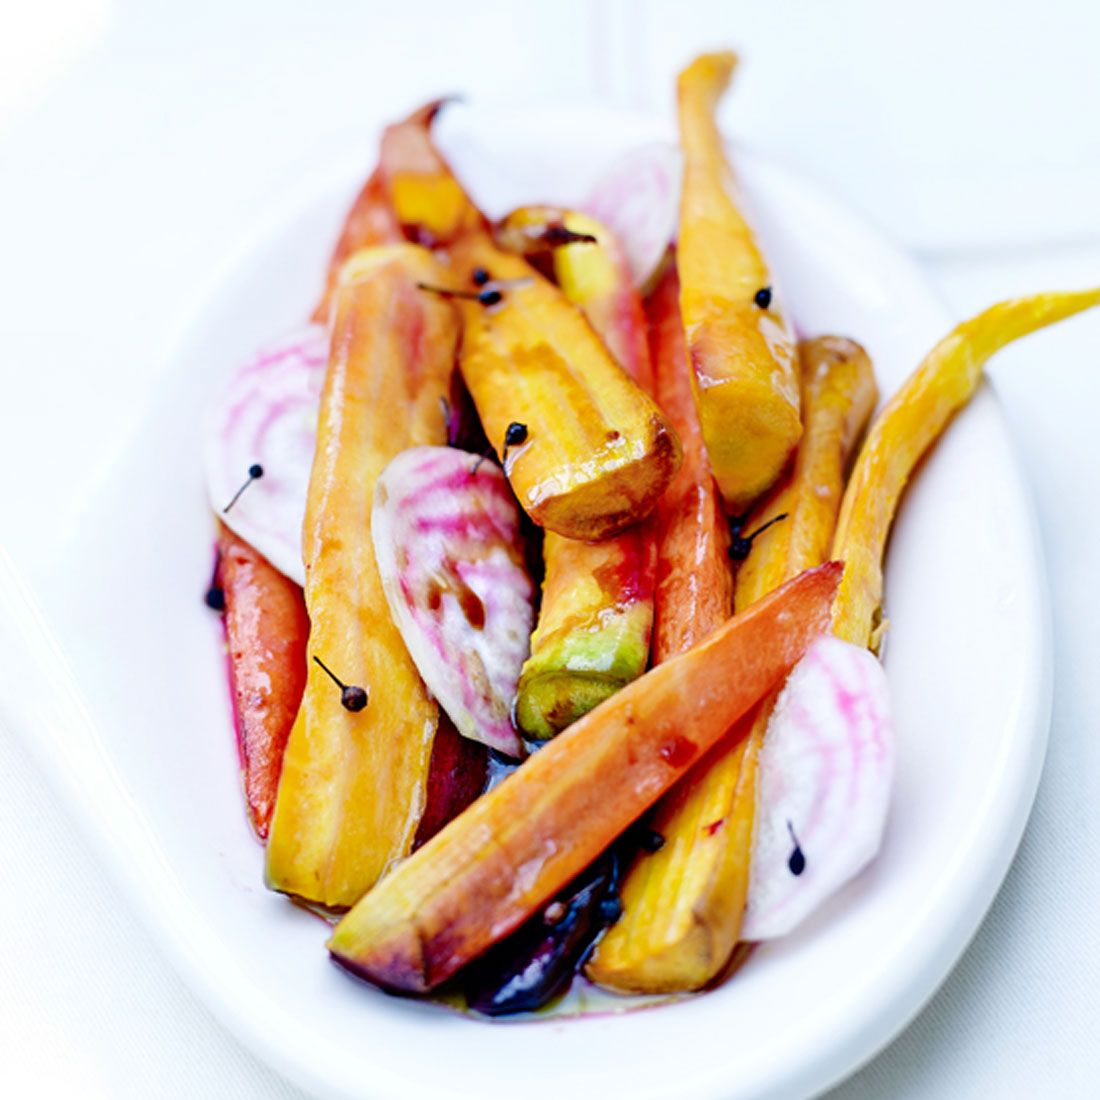 Tricolor Roasted Carrots with Premium Balsamic